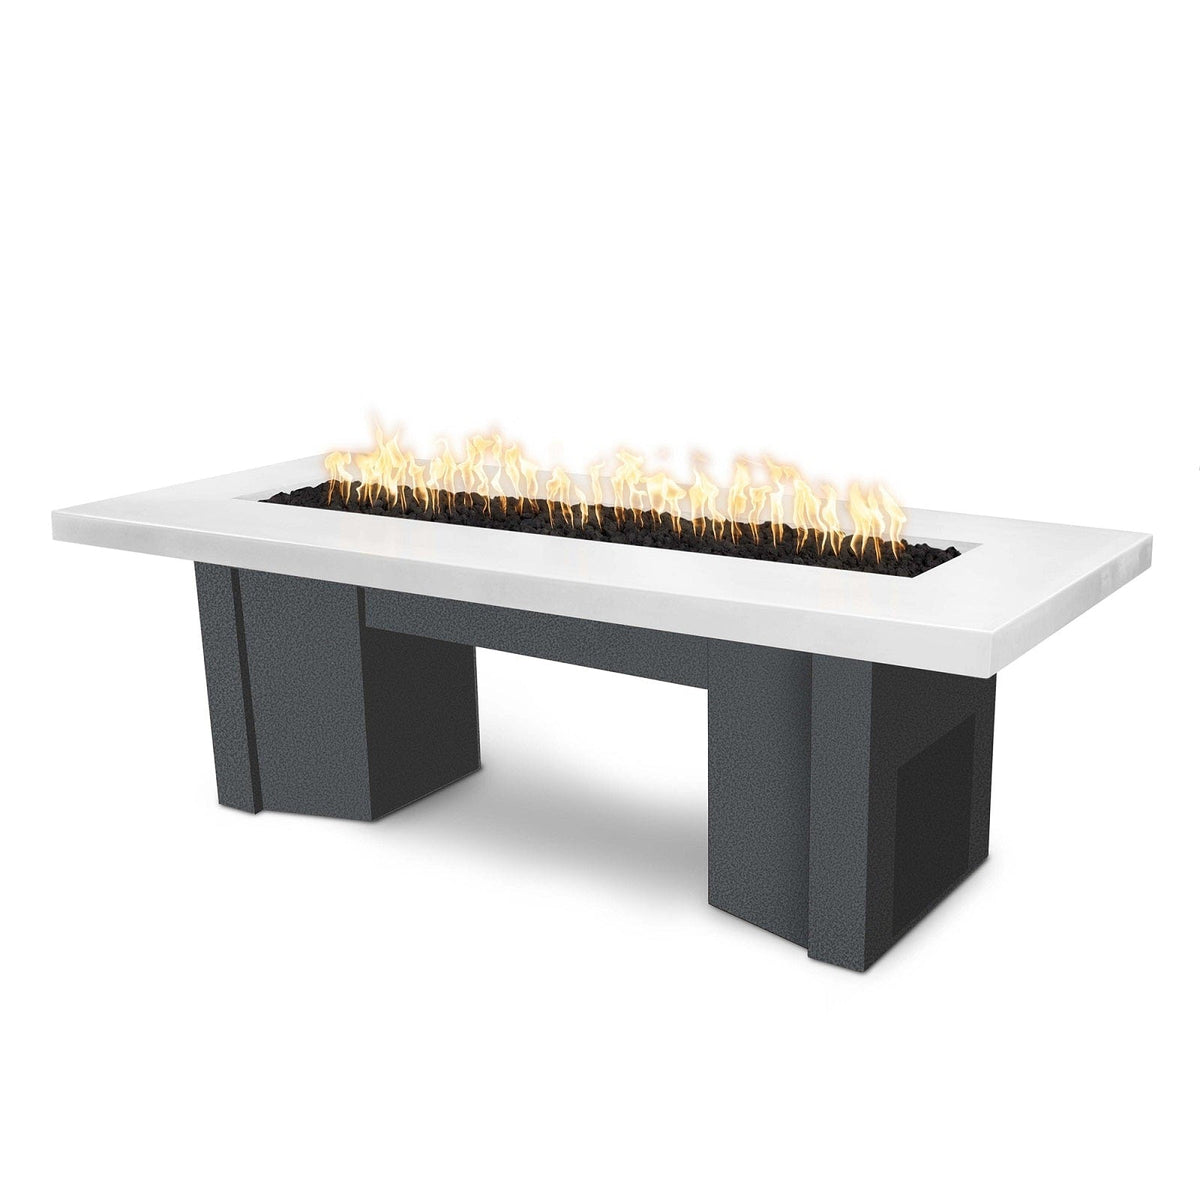 The Outdoor Plus Fire Features Limestone (-LIM) / Silver Vein Powder Coated Steel (-SLV) The Outdoor Plus 78&quot; Alameda Fire Table Smooth Concrete in Liquid Propane - Match Lit with Flame Sense System / OPT-ALMGFRC78FSML-LP